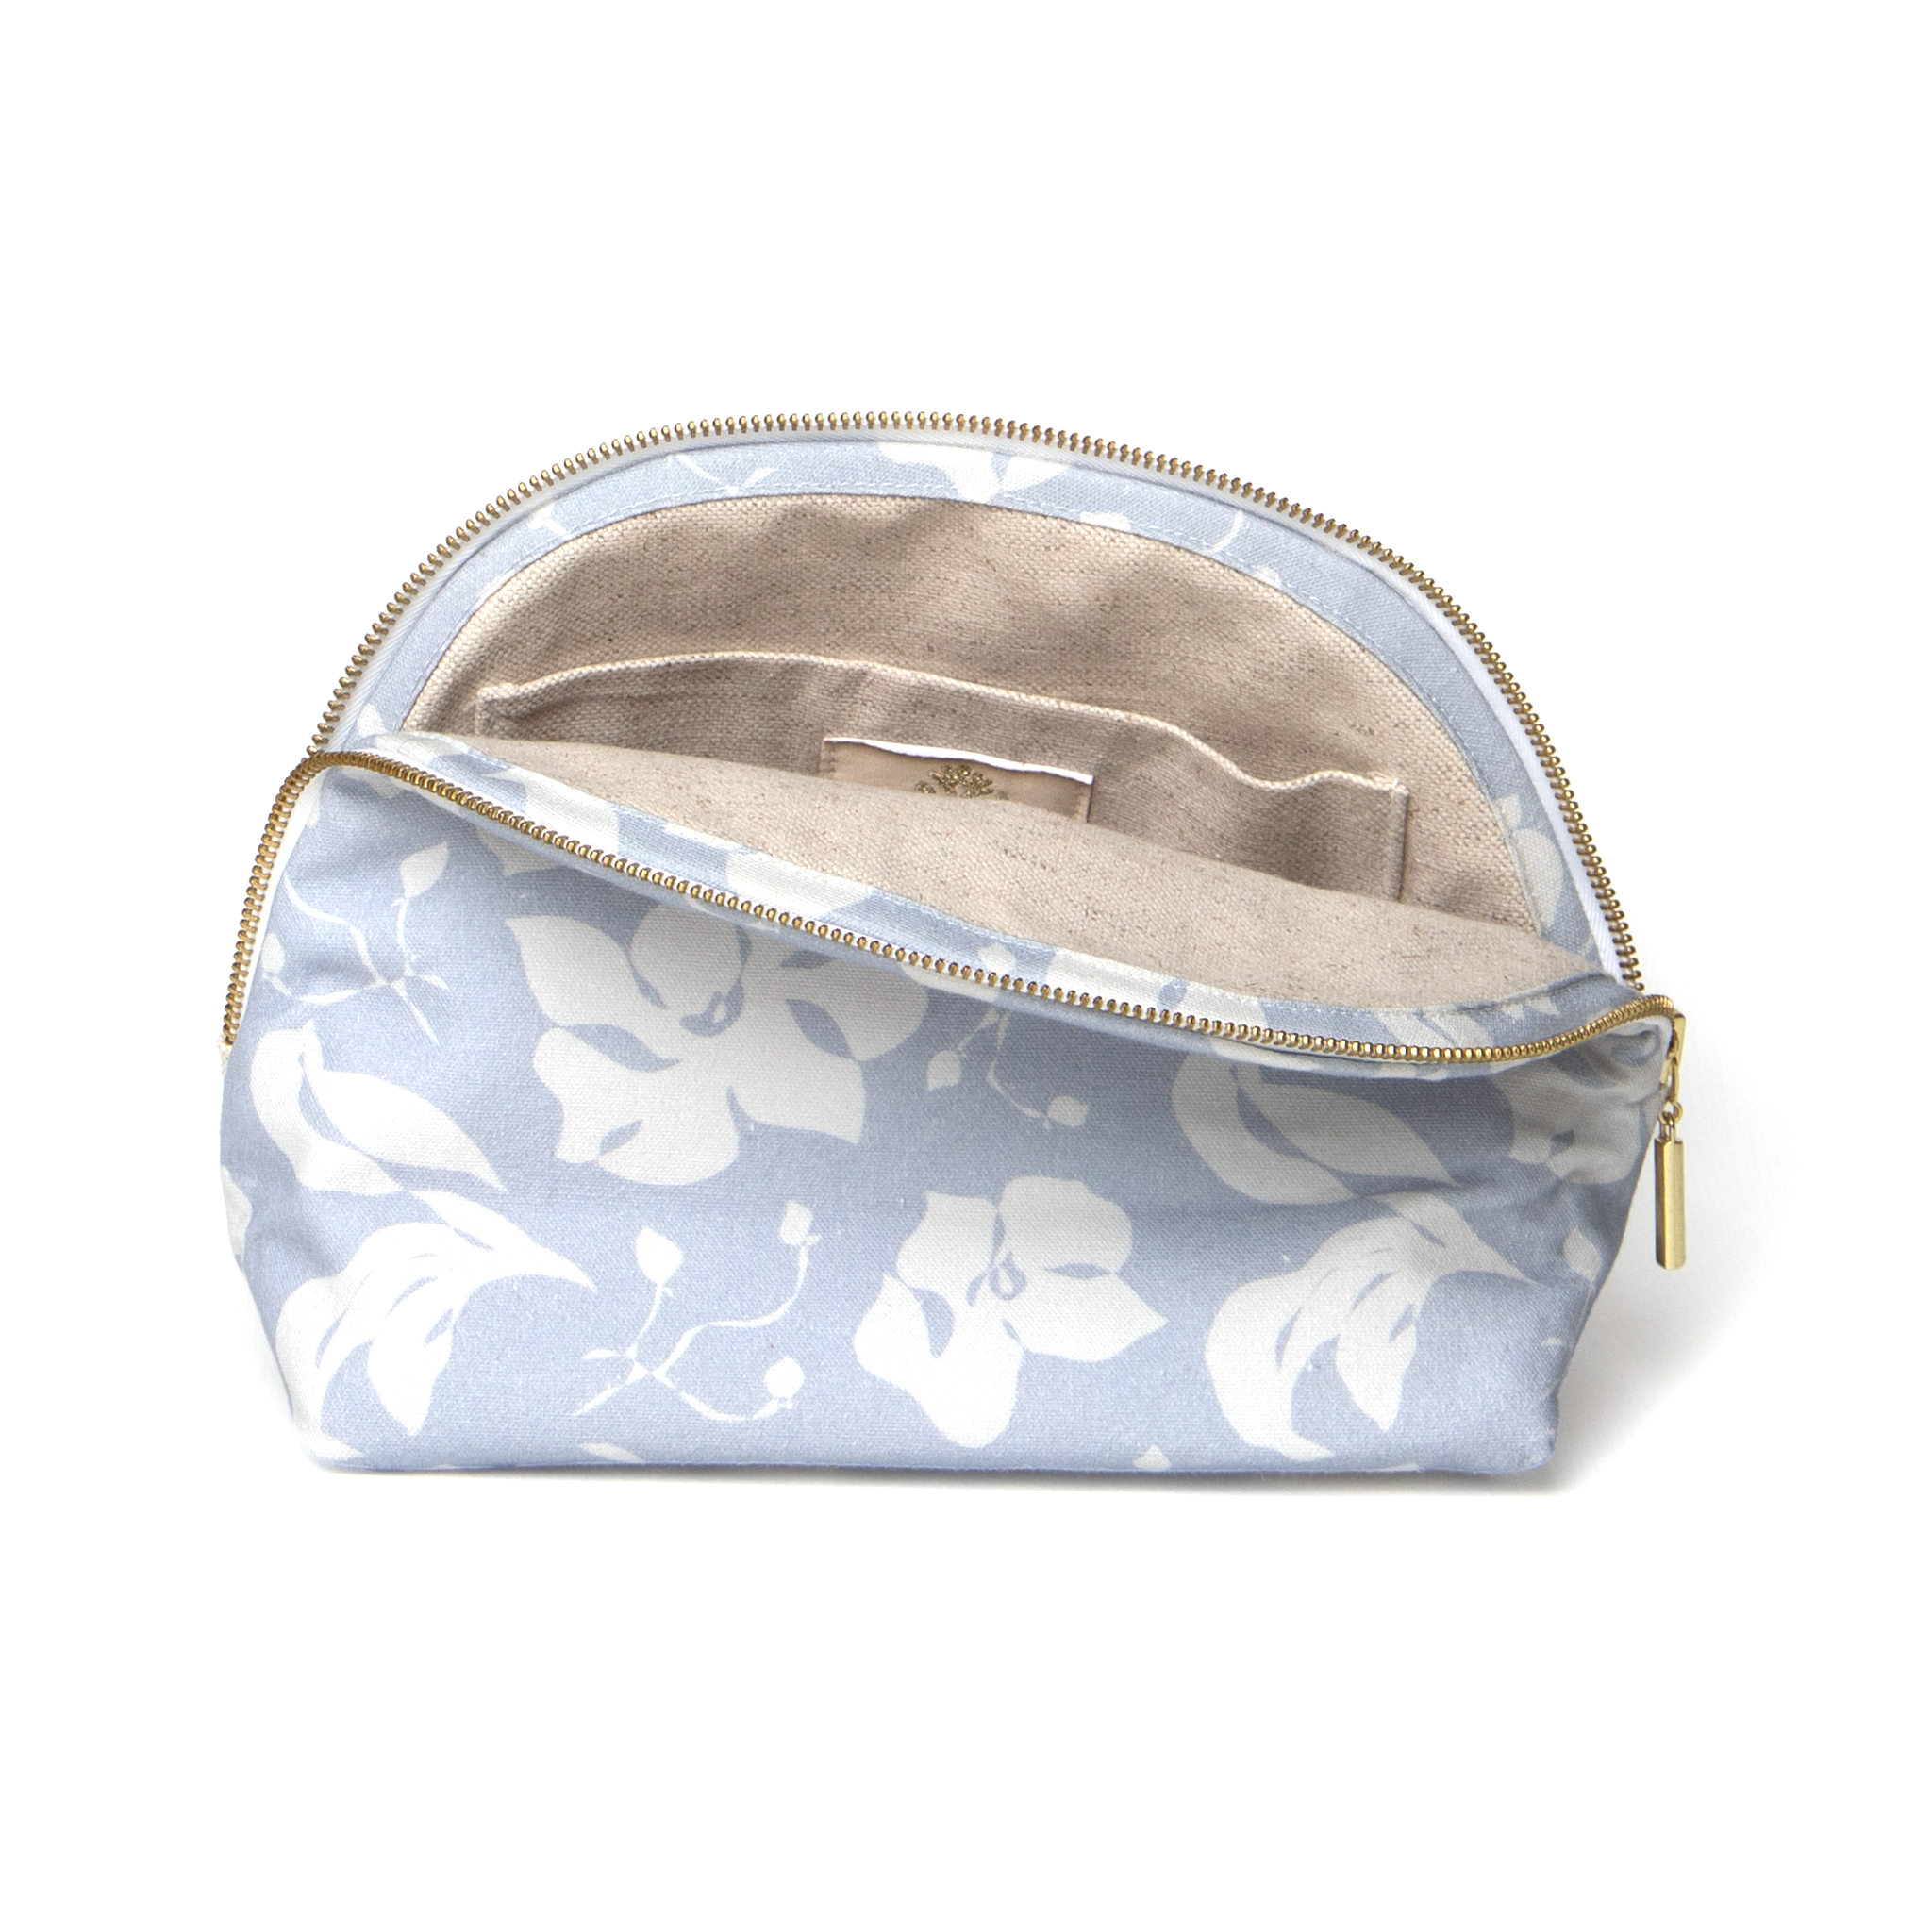 Cornflower Blue Floral Printed Pouch with gold zipper